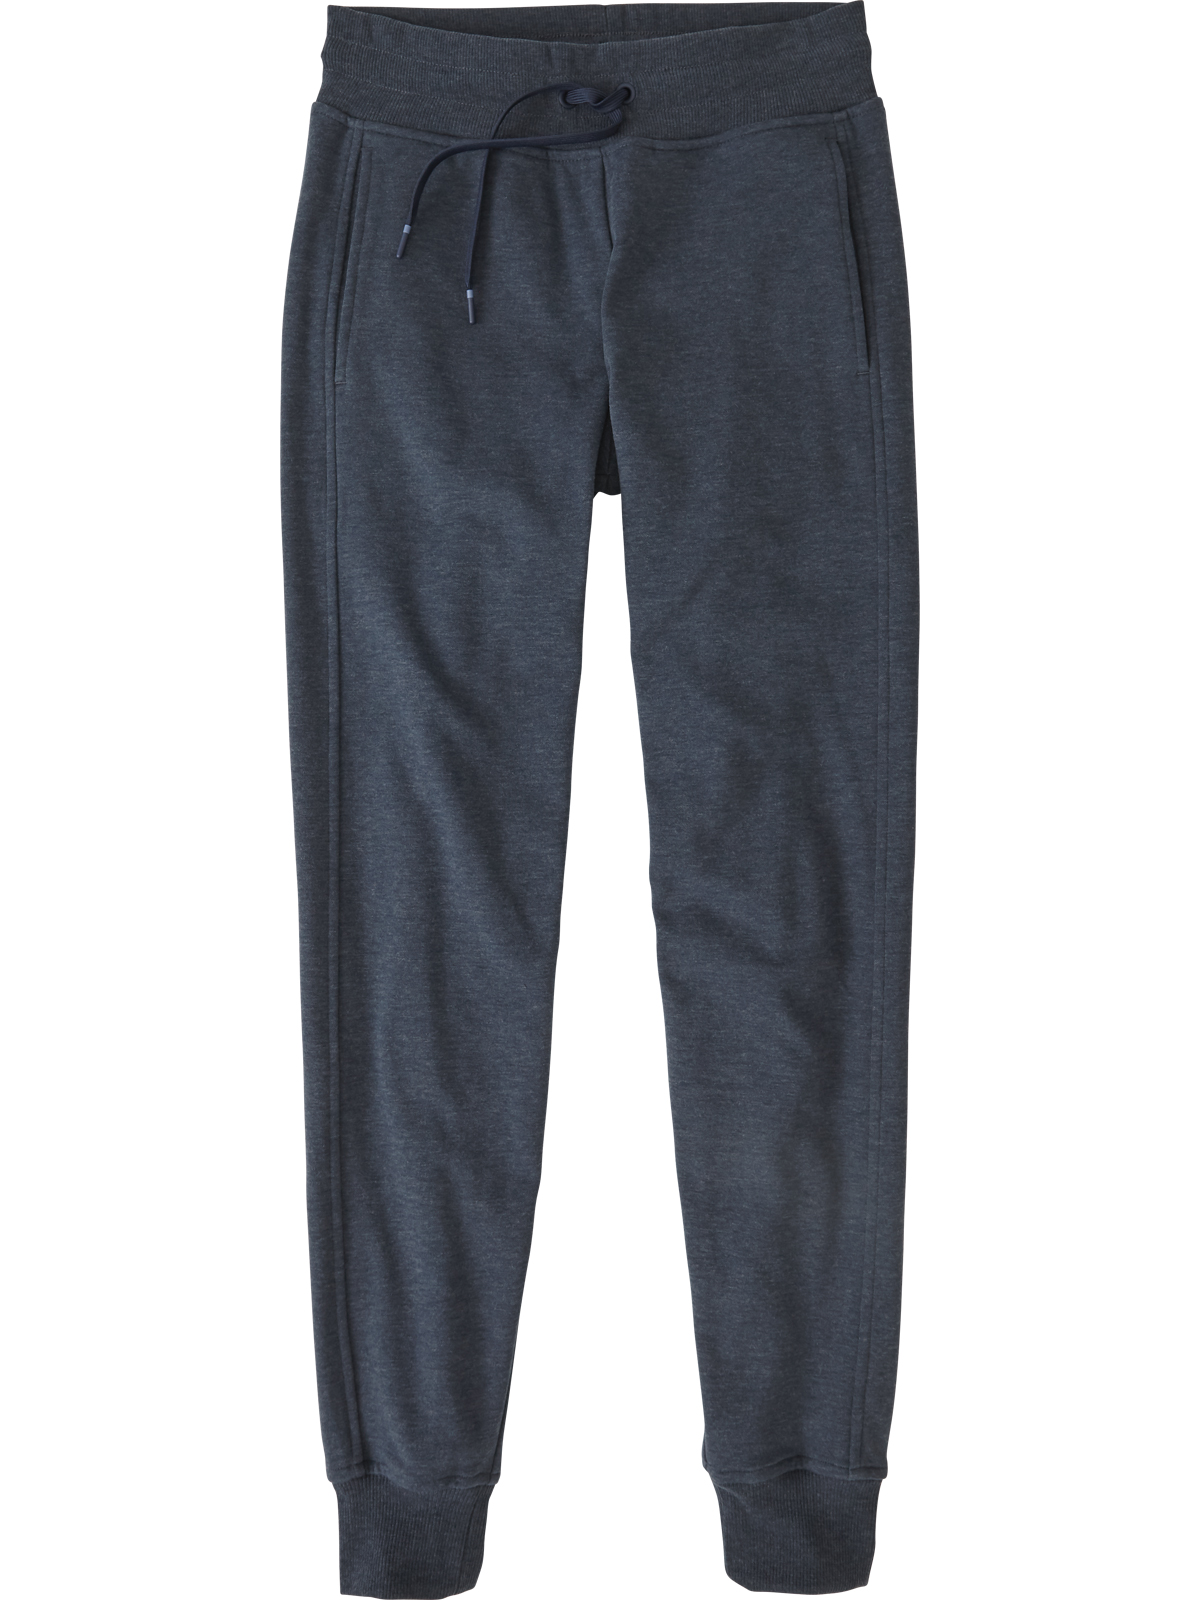 These new Fleece lined joggers from @gradualsports remind me so